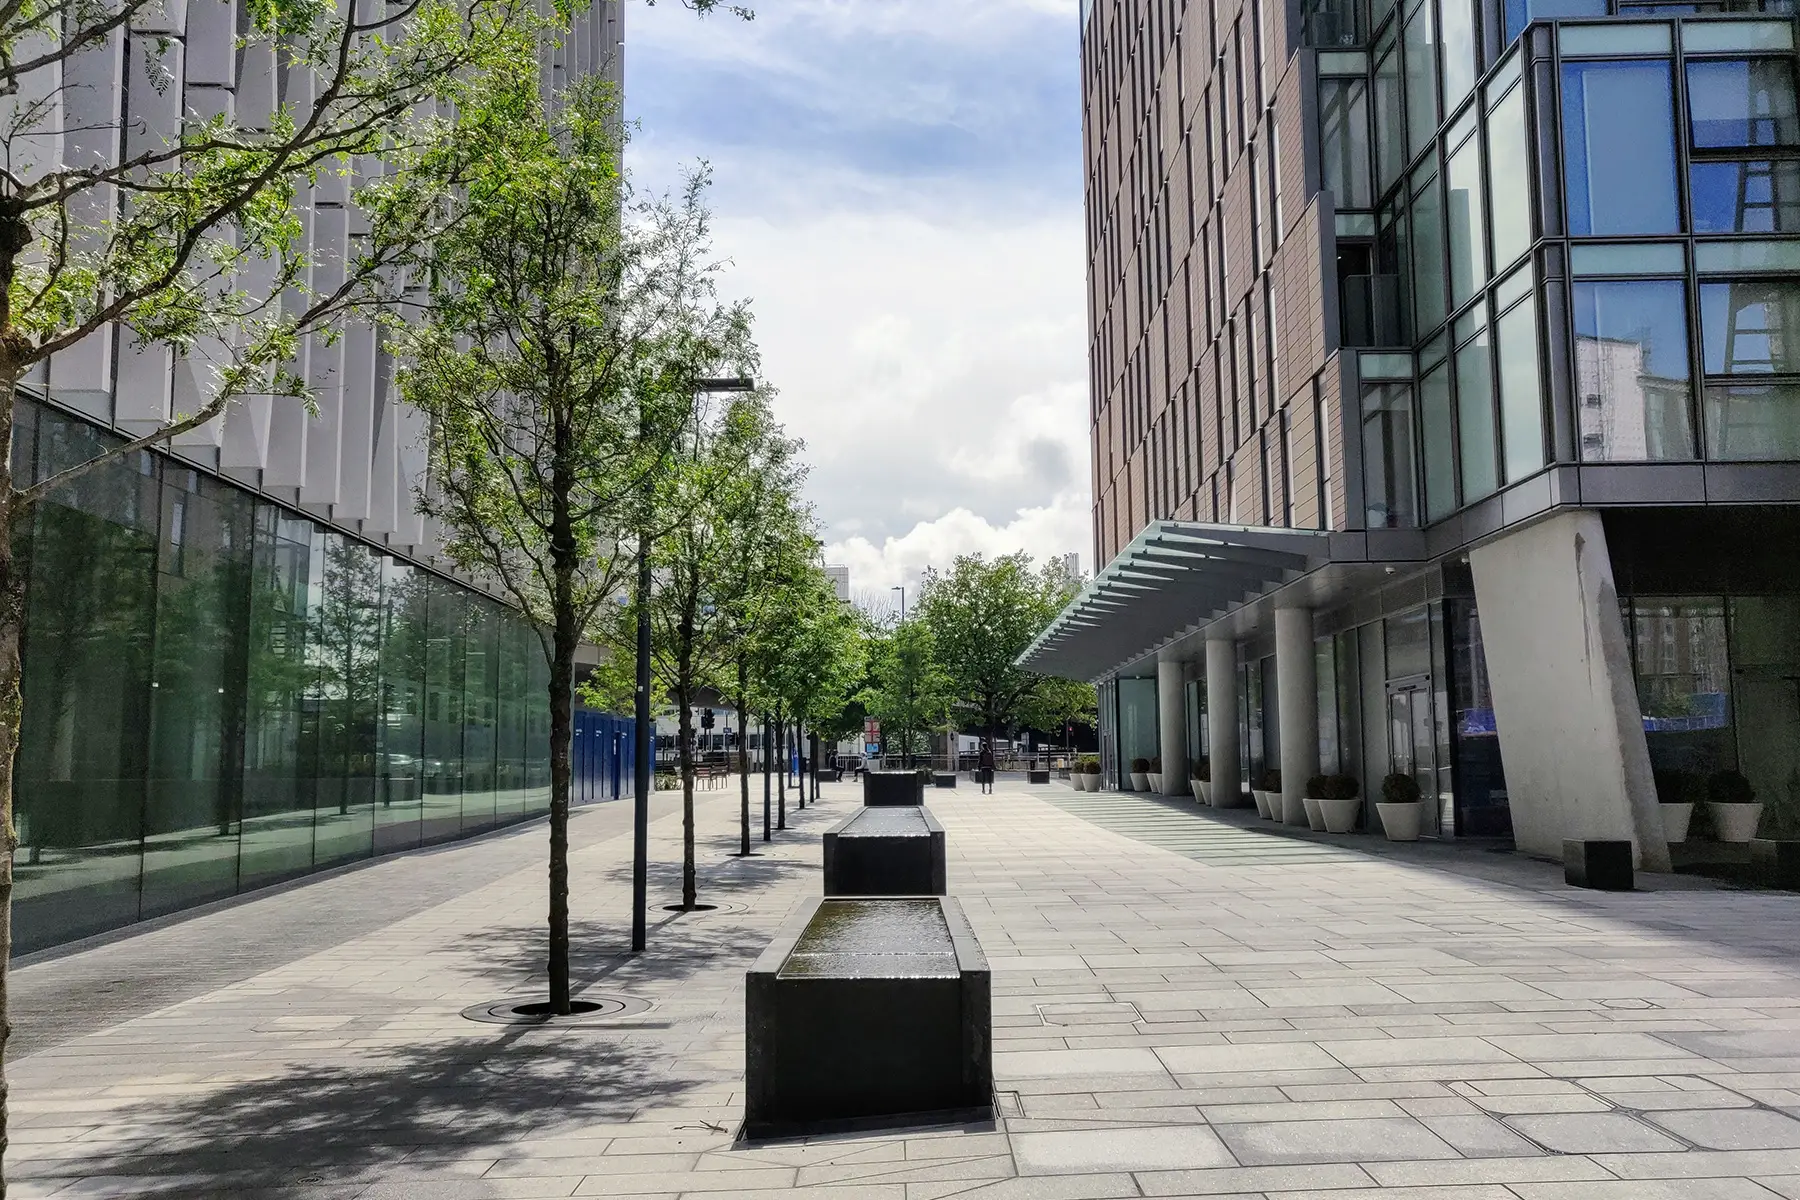 A paved pedestrian area with tall glass buildings either side and a fountain in the middle.